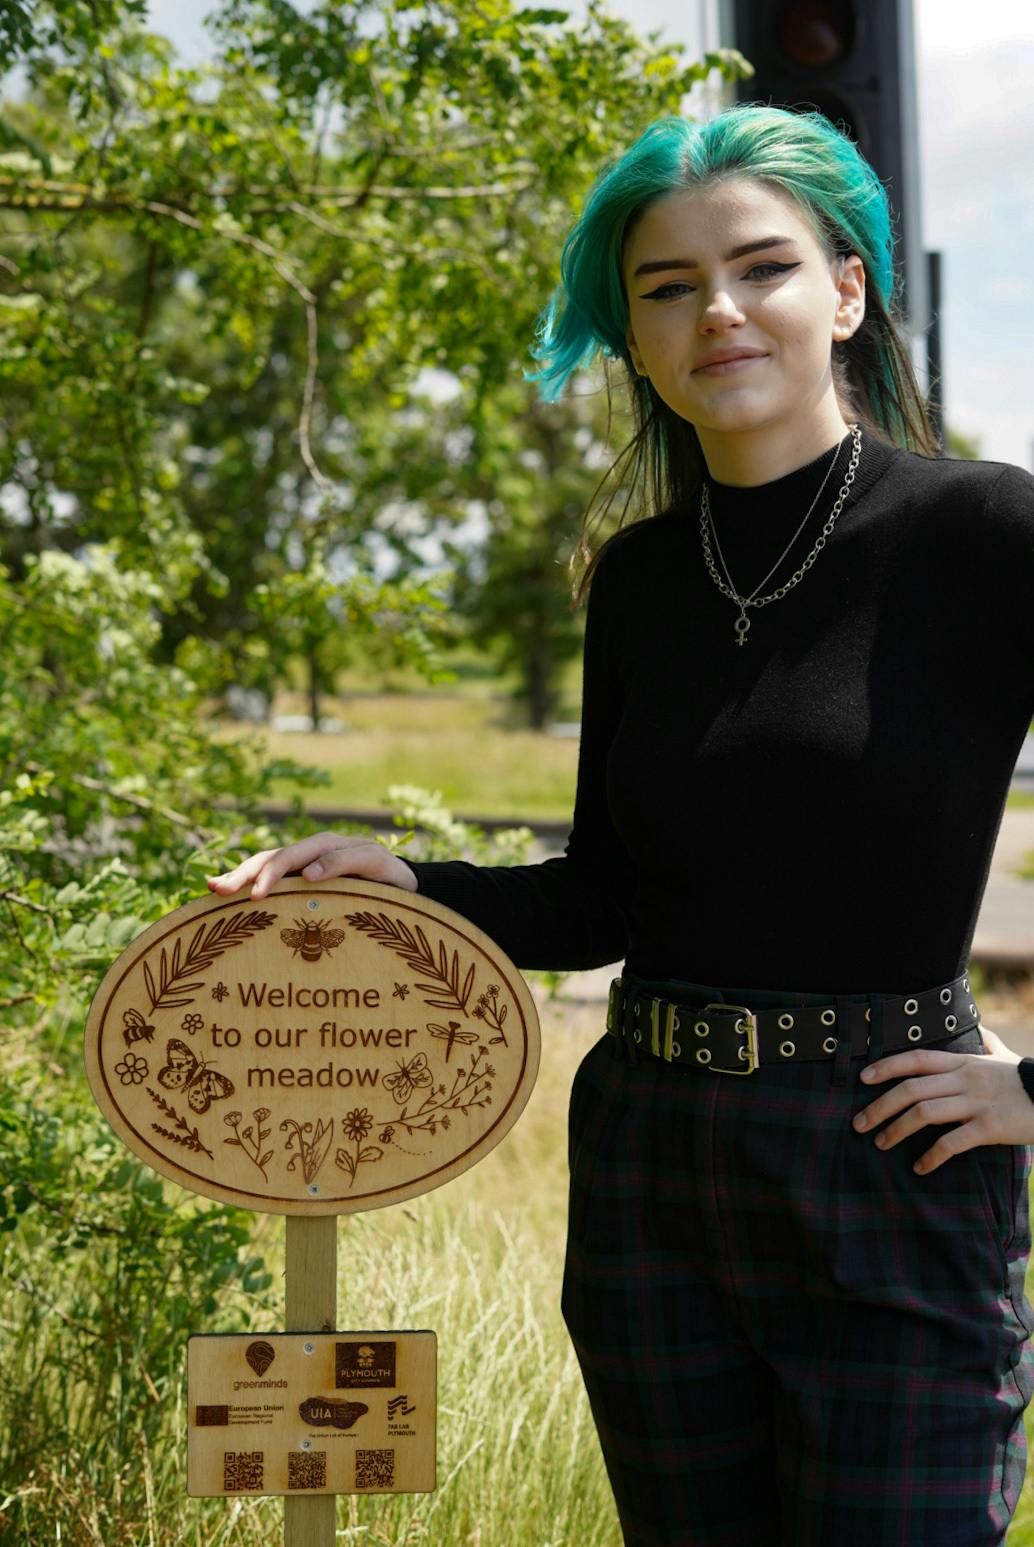 Lauren Williams with their wildflower meadow sign Image Credit Paul Williams